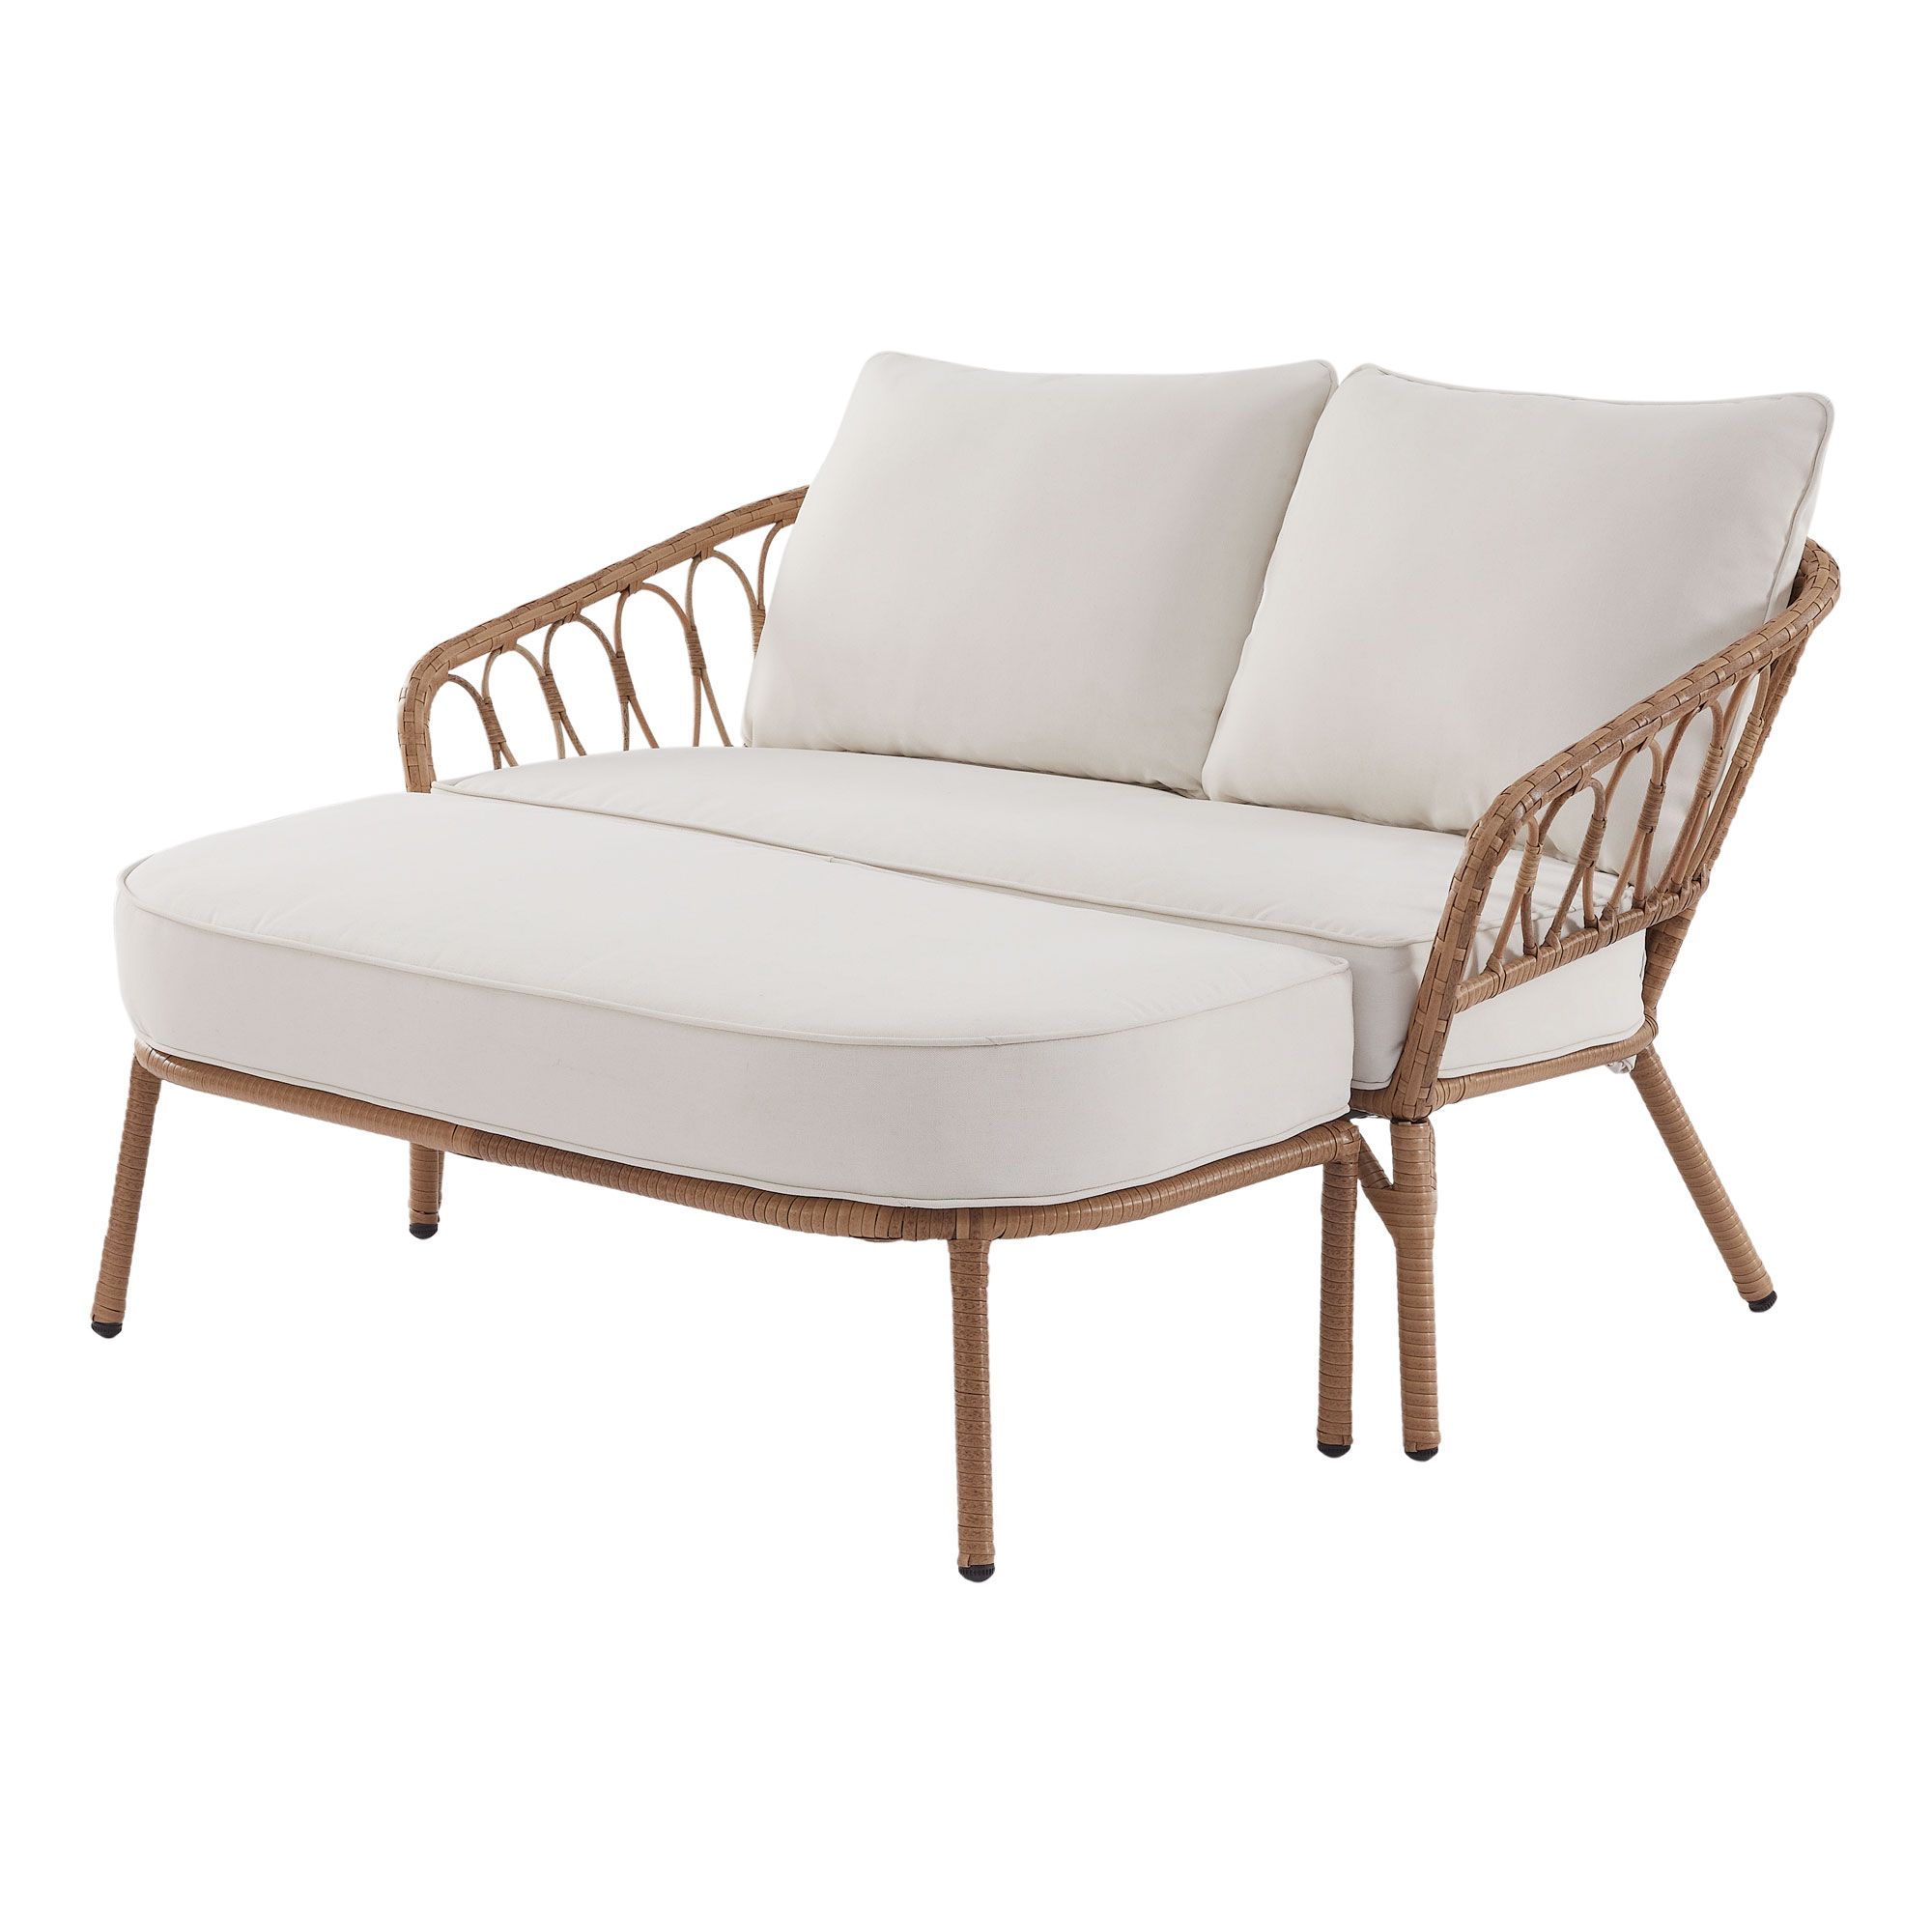 Better Homes & Gardens Willow Sage Wicker All-Weather Outdoor Loveseat and Ottoman Set (Beige) $249 + Free Shipping